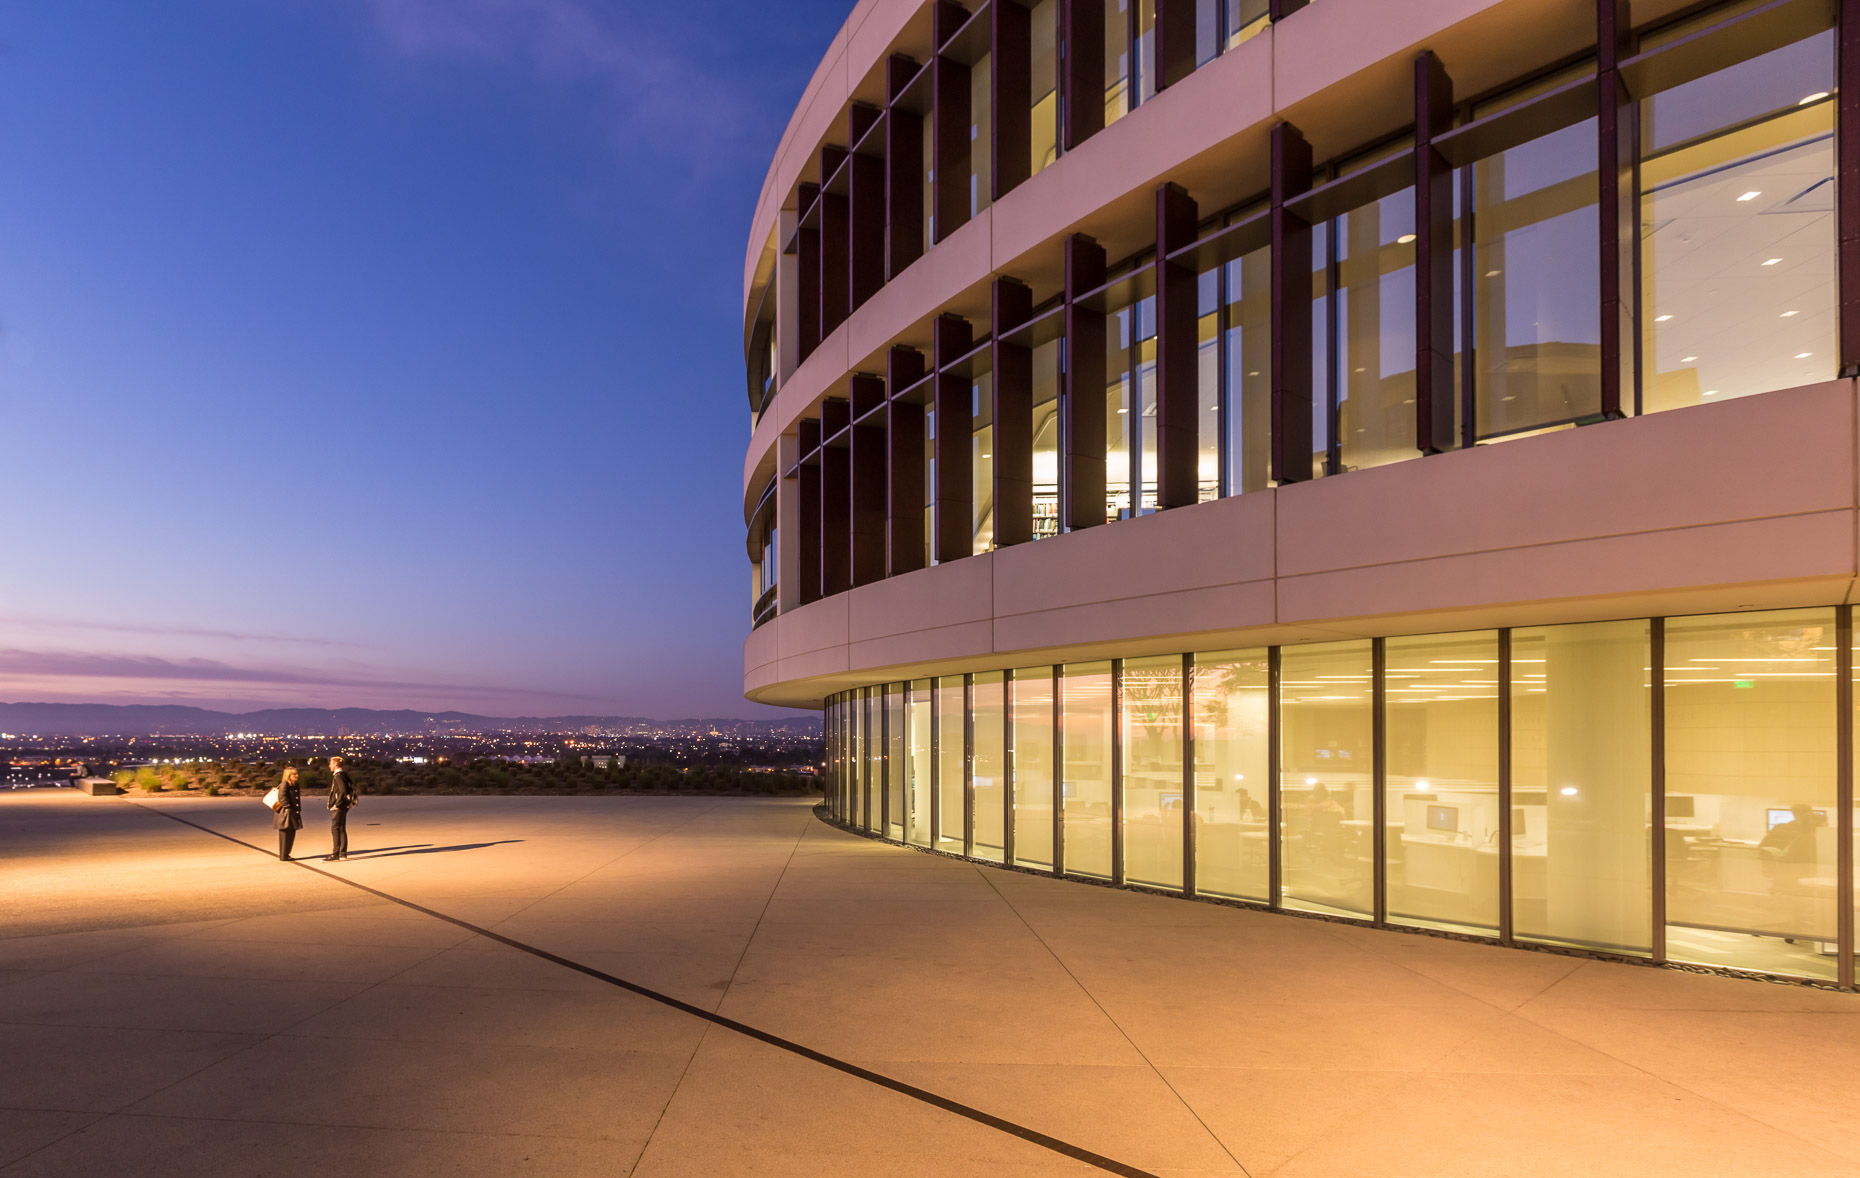 Architecture shot including people standing next to circular building at dusk. Hannon Library at Loyola Marymount University LMU in Los Angeles, California.  David Zaitz Photography.